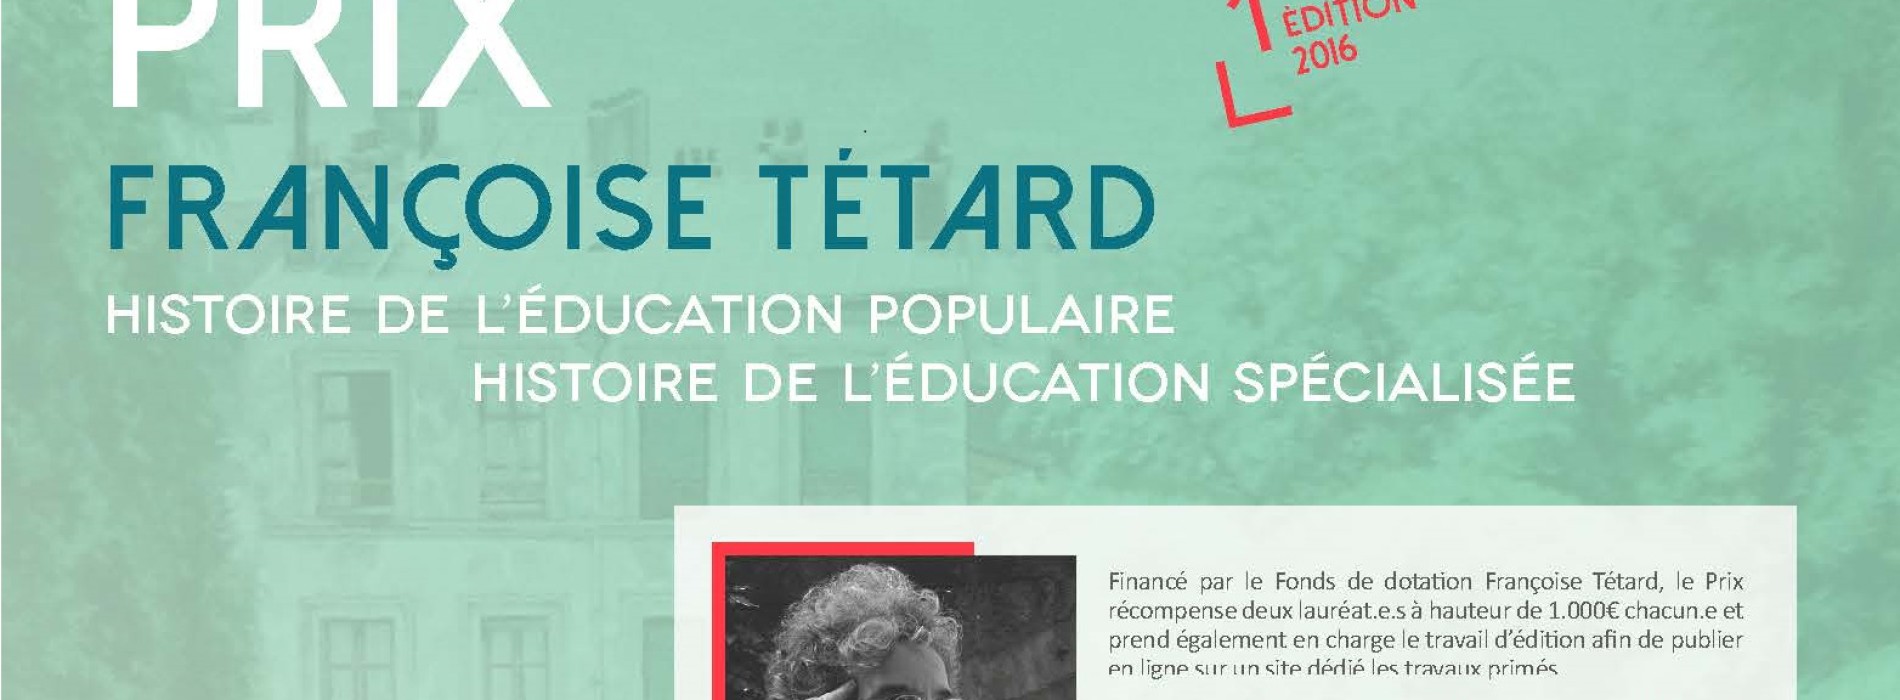 Creation of a Prix Françoise Tétard for master’s essays in French on the history of popular or specialized education